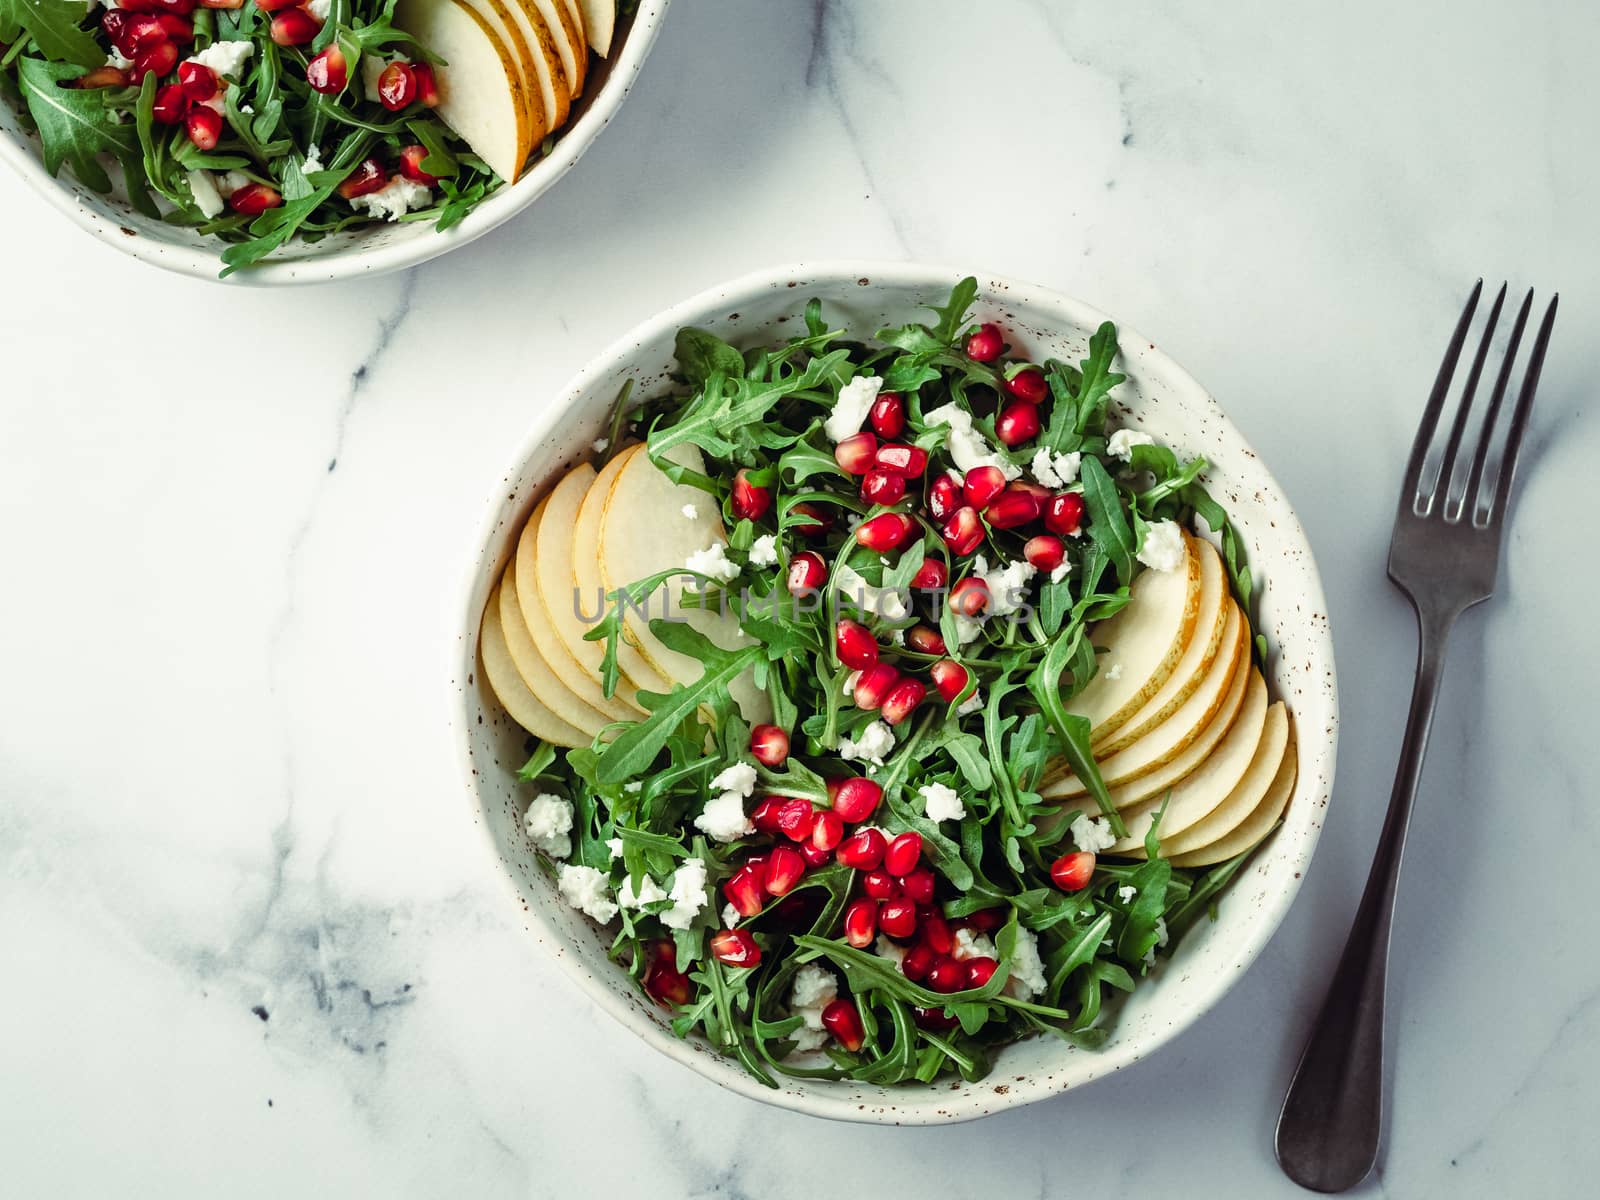 Vegan salad bowl with arugula, pear, pomegranate, coconut crumble or cottage cheese on marble tabletop. Vegan breakfast, vegetarian food, diet concept. Top view or flat lay.